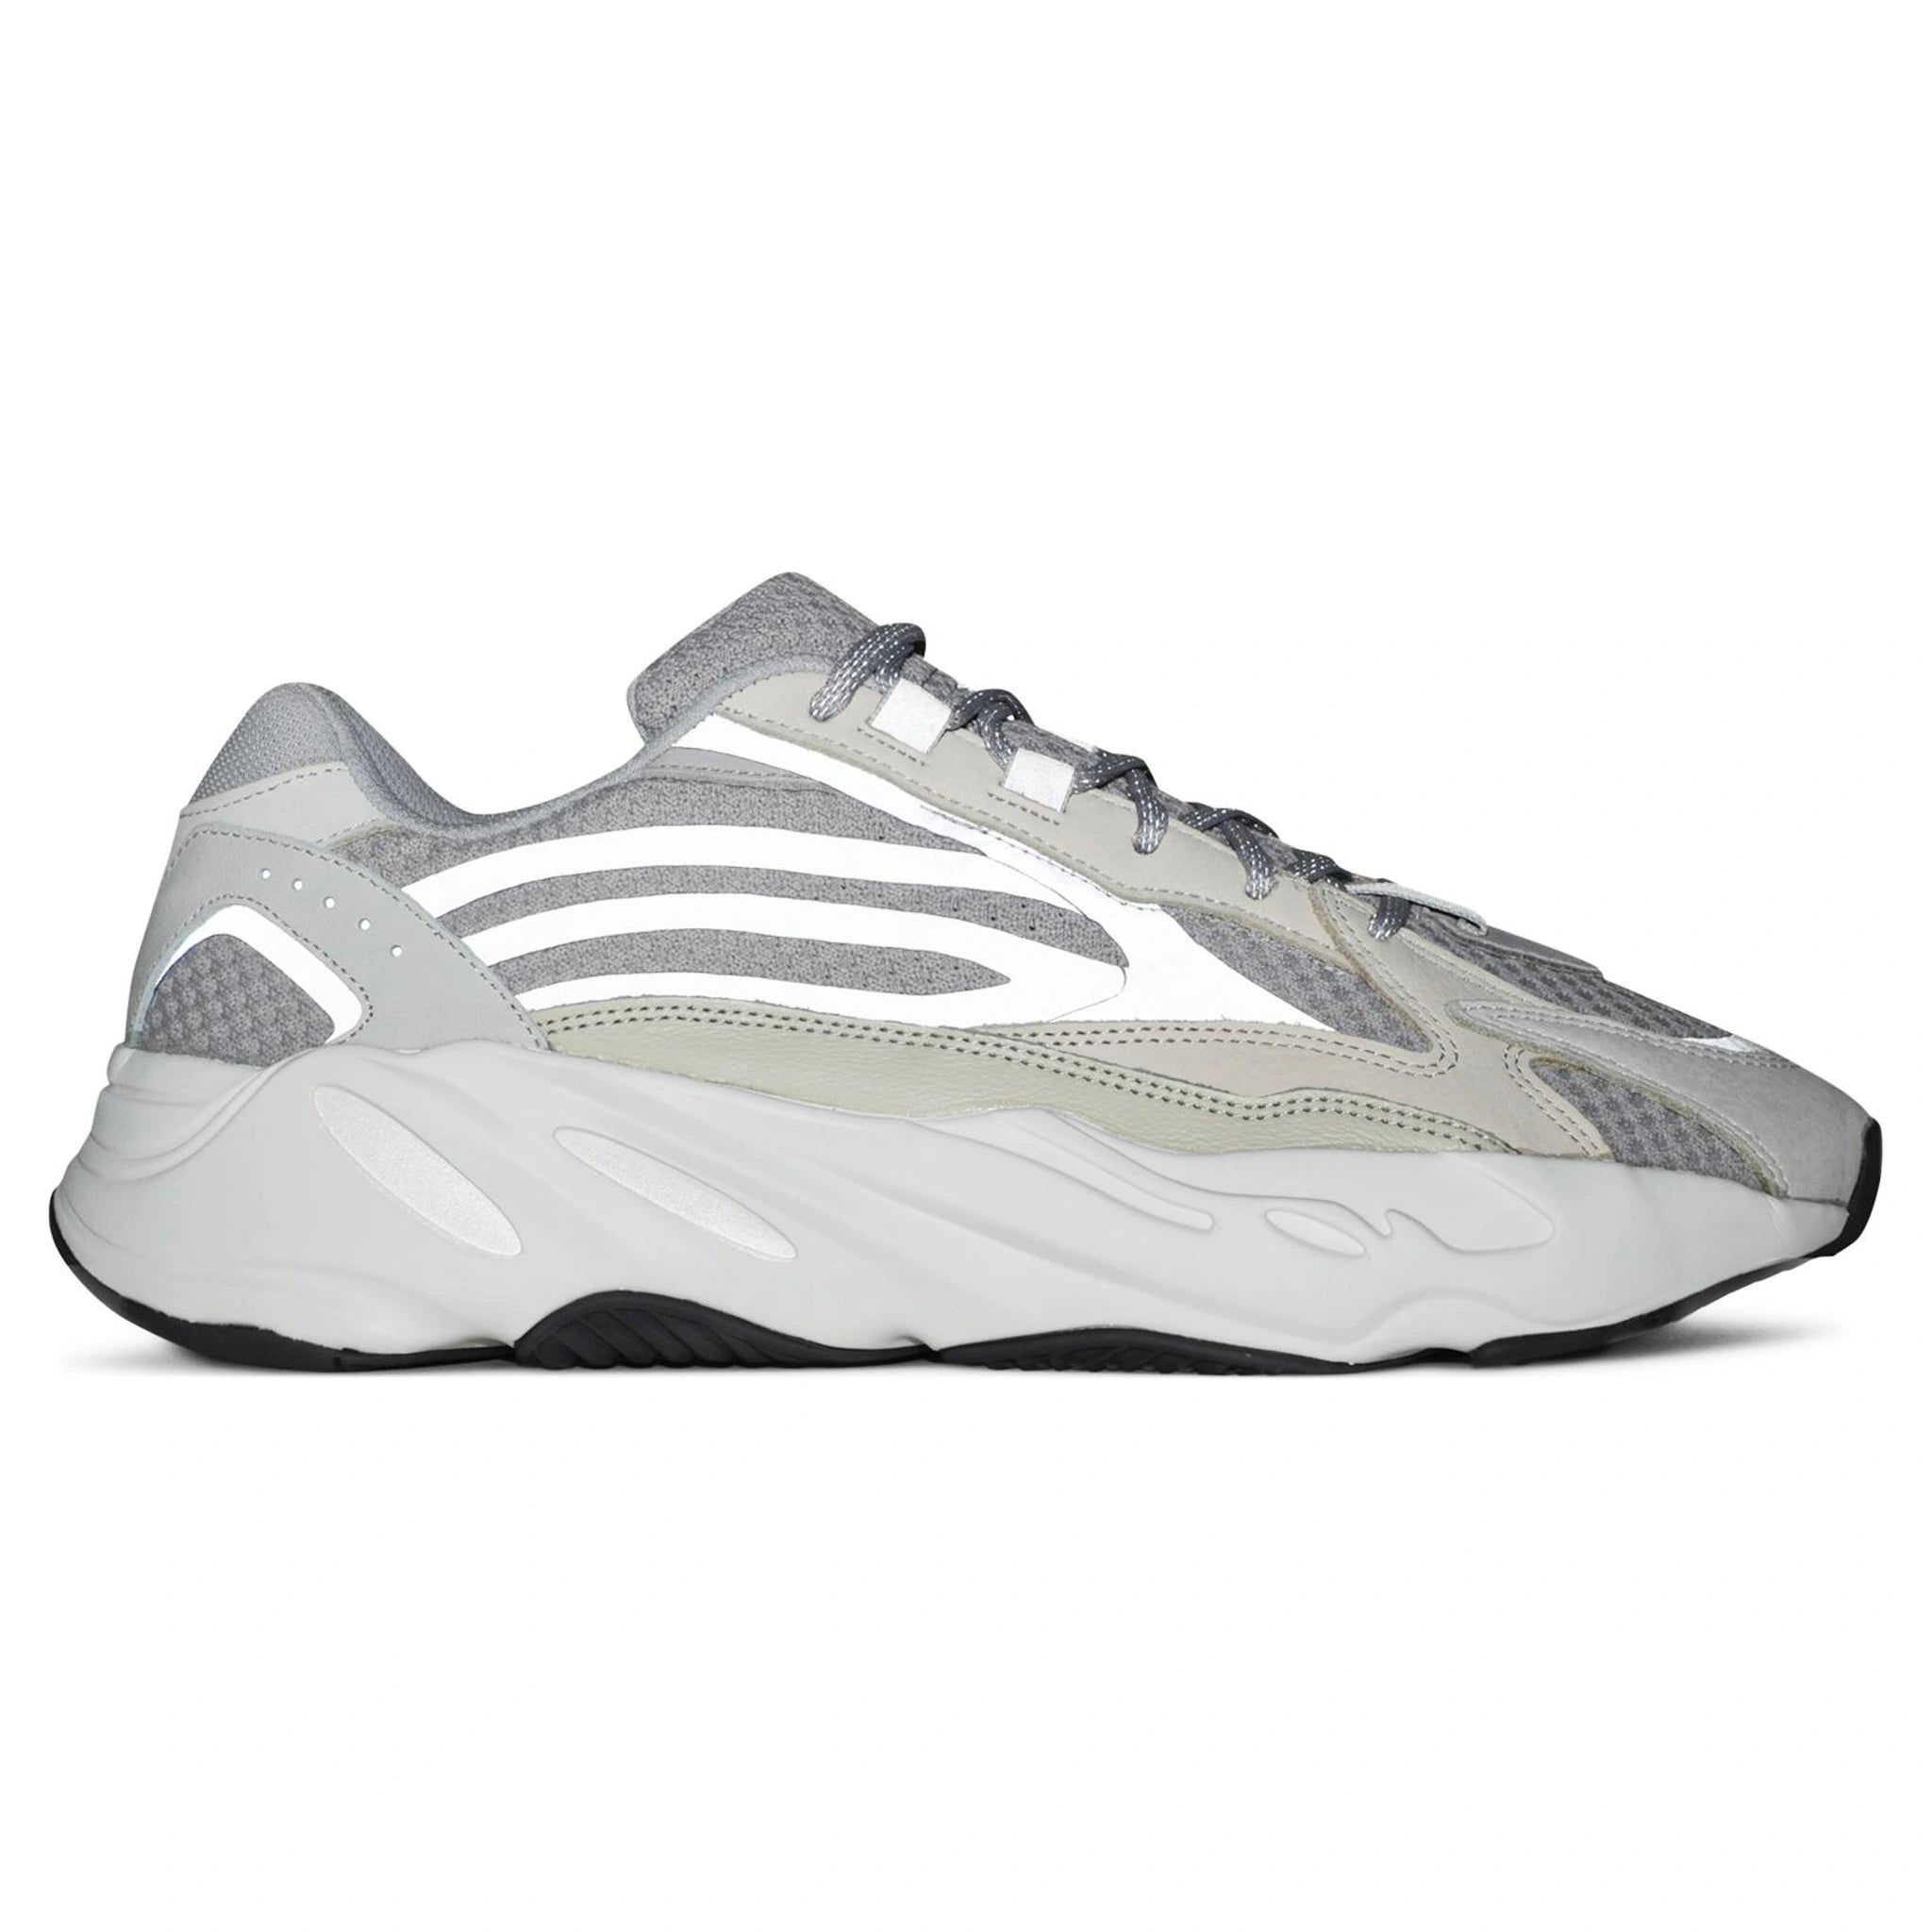 Side view of Adidas Yeezy 700 Boost V2 Cream GY7924